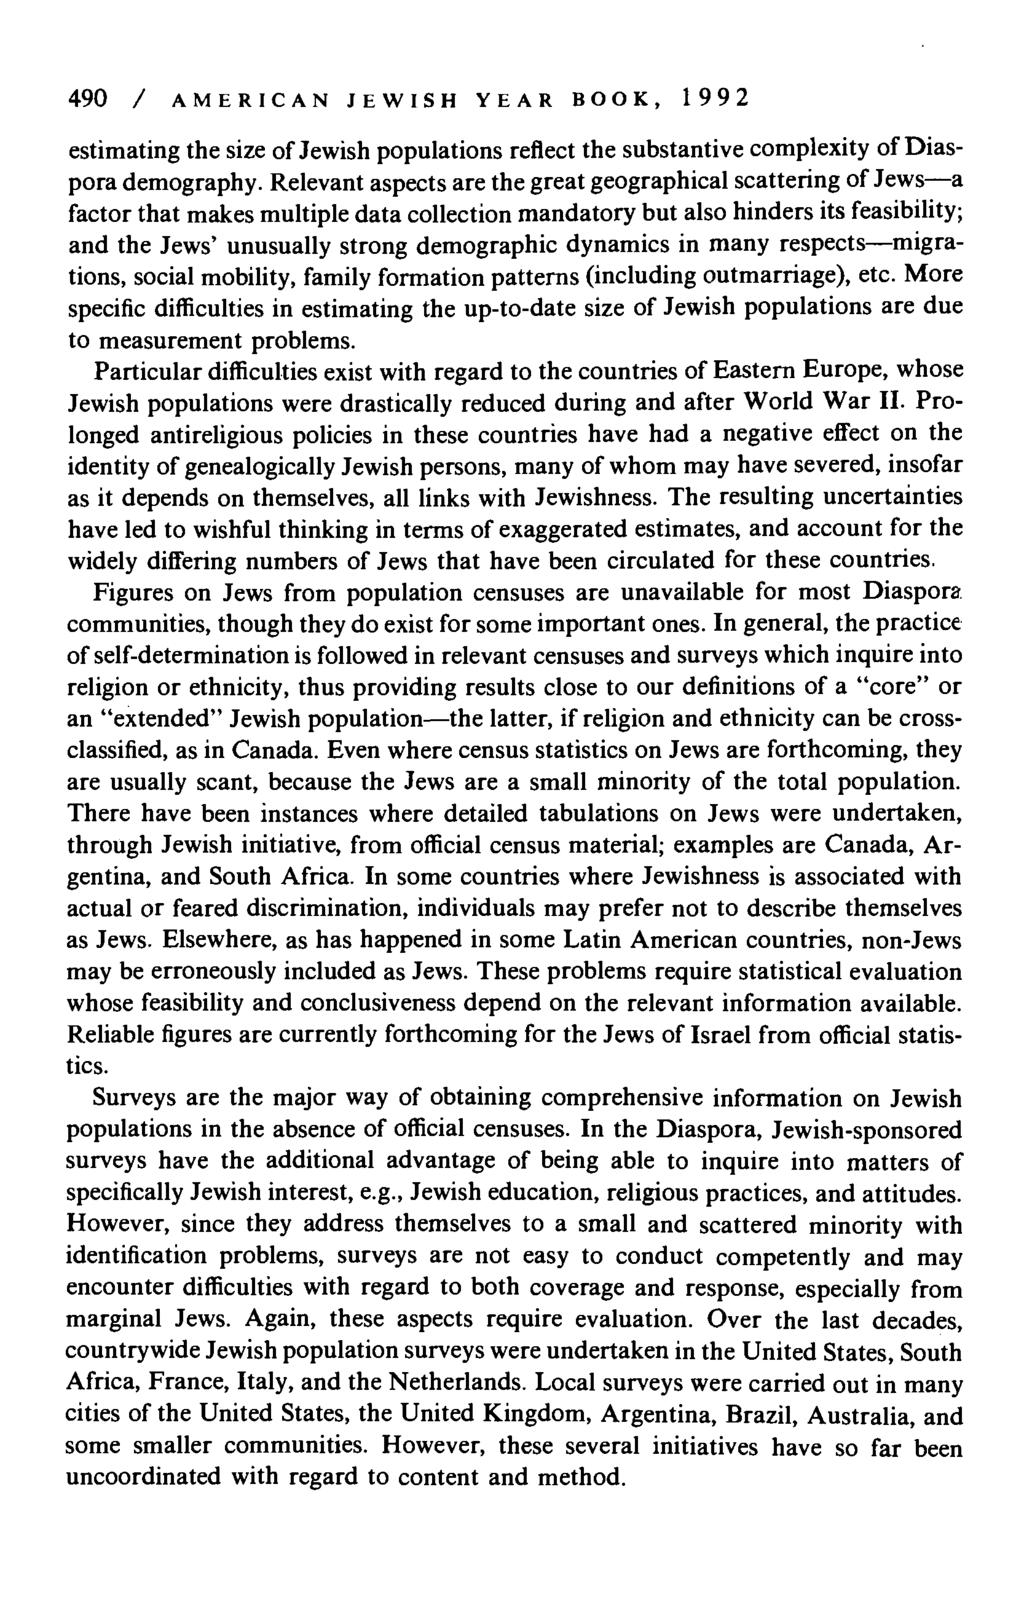 490 / AMERICAN JEWISH YEAR BOOK, 1992 estimating the size of Jewish populations reflect the substantive complexity of iaspora demography.